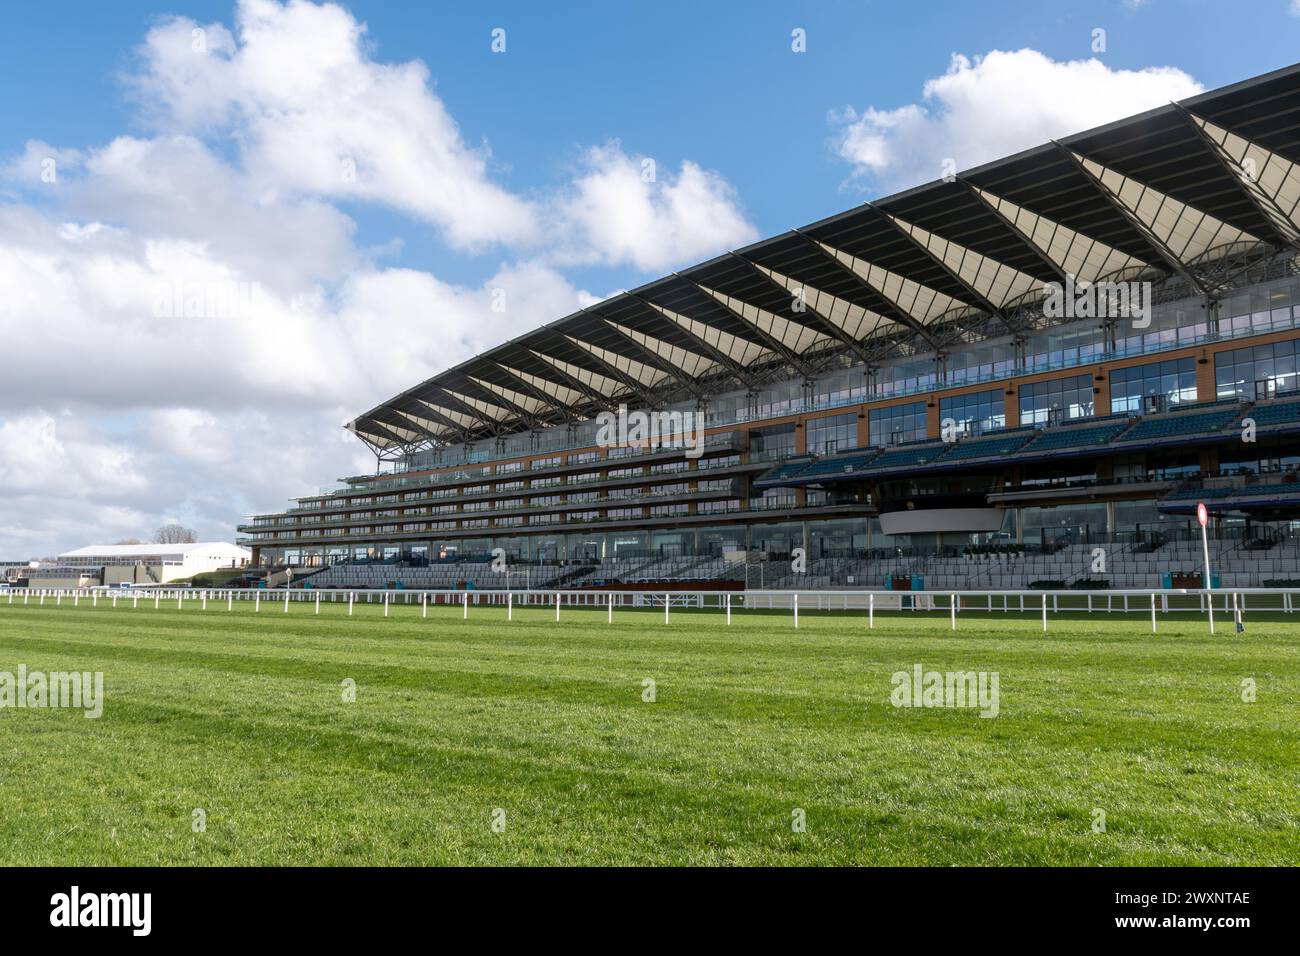 Ascot Racecourse, view of the impressive Grandstand, Berkshire, England, UK, on a non-race day Stock Photo